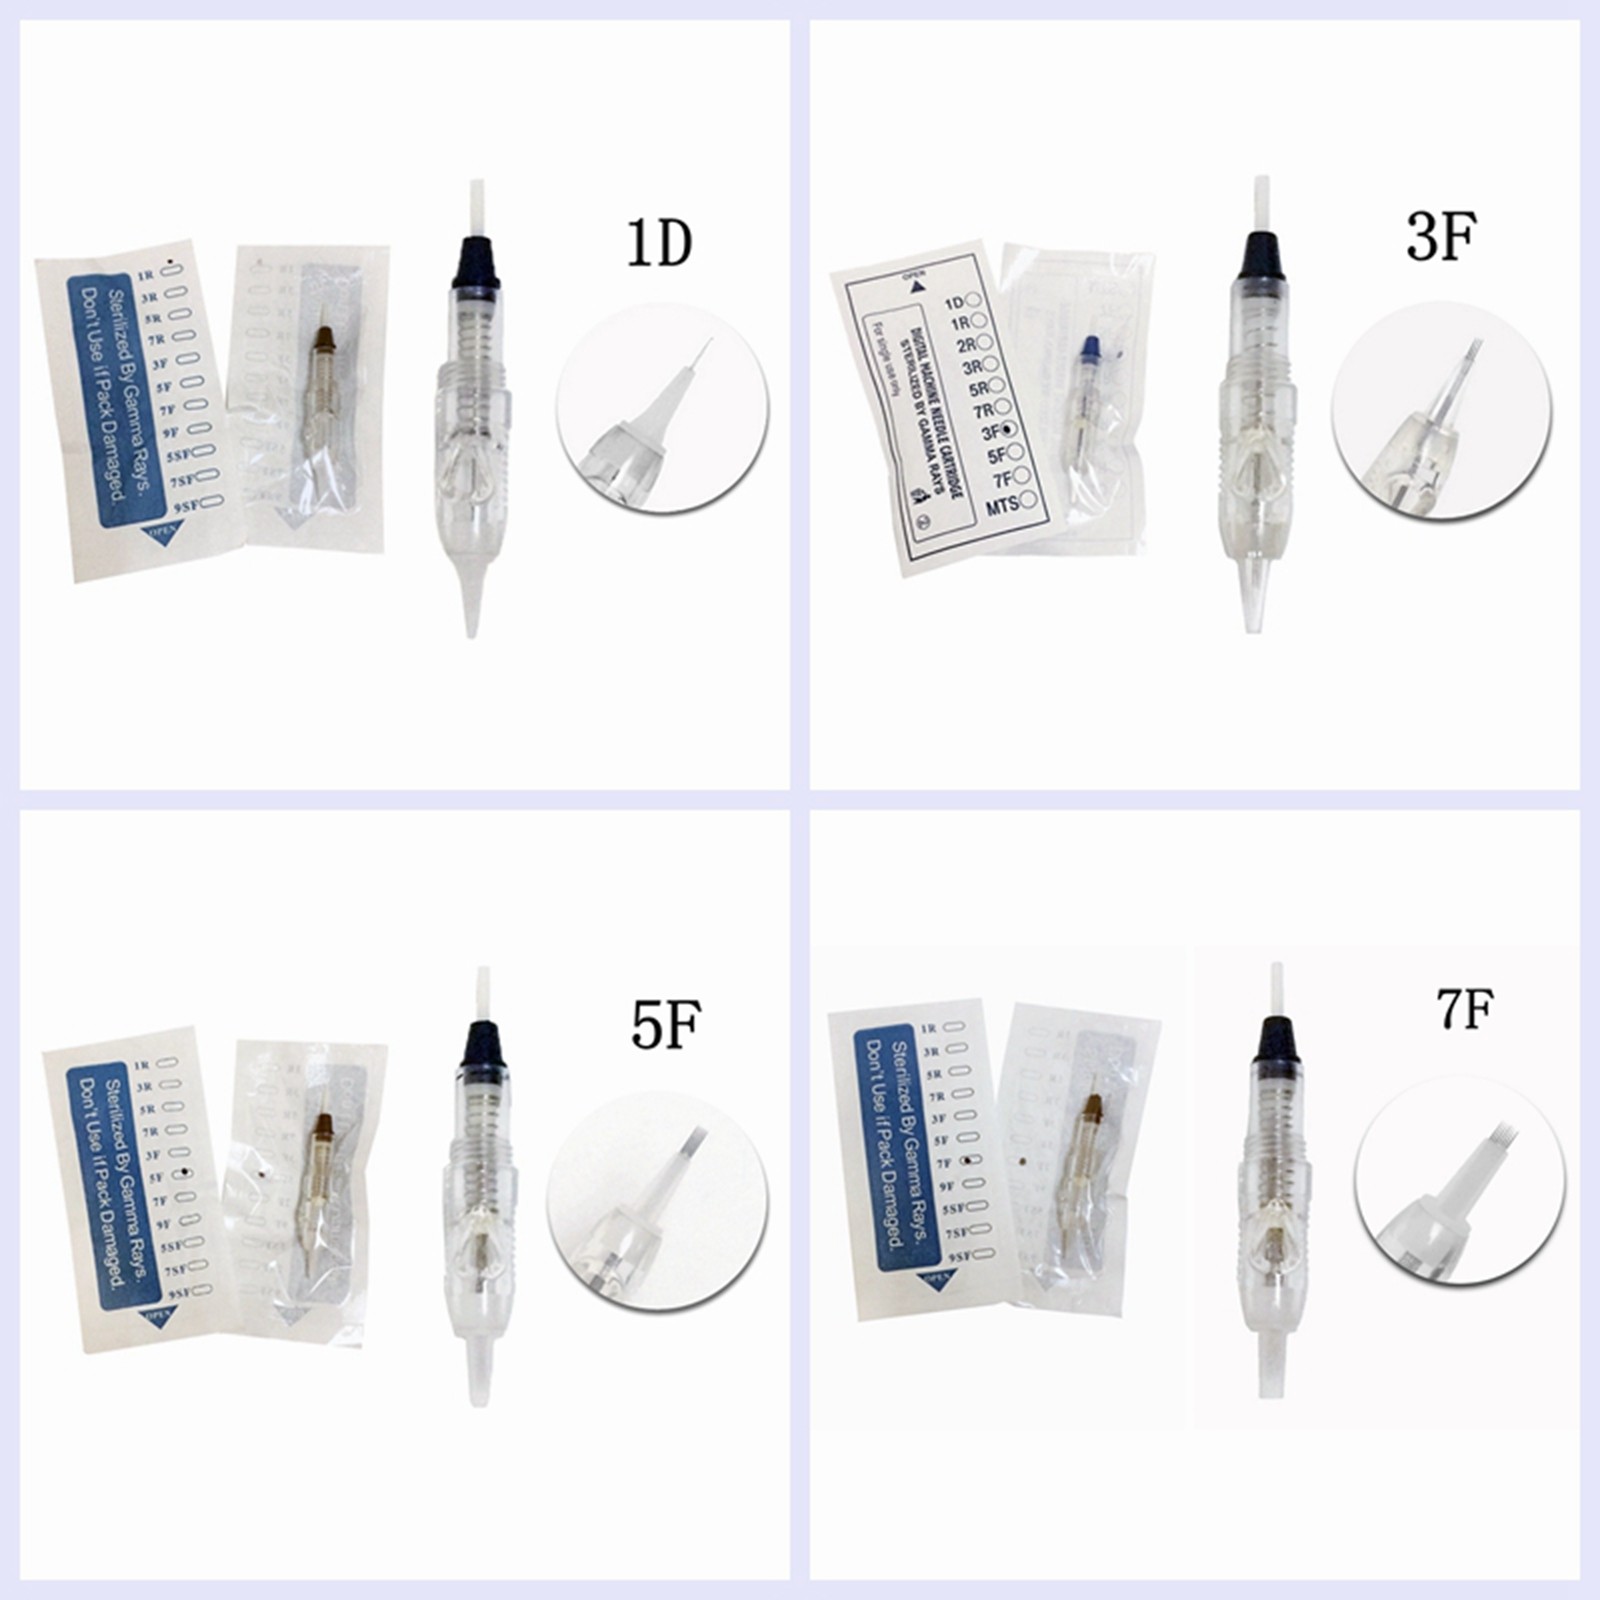 BoLin-Find Semi Disposable Tattoo Needle Cartridges From Bolin Cosmetic-4